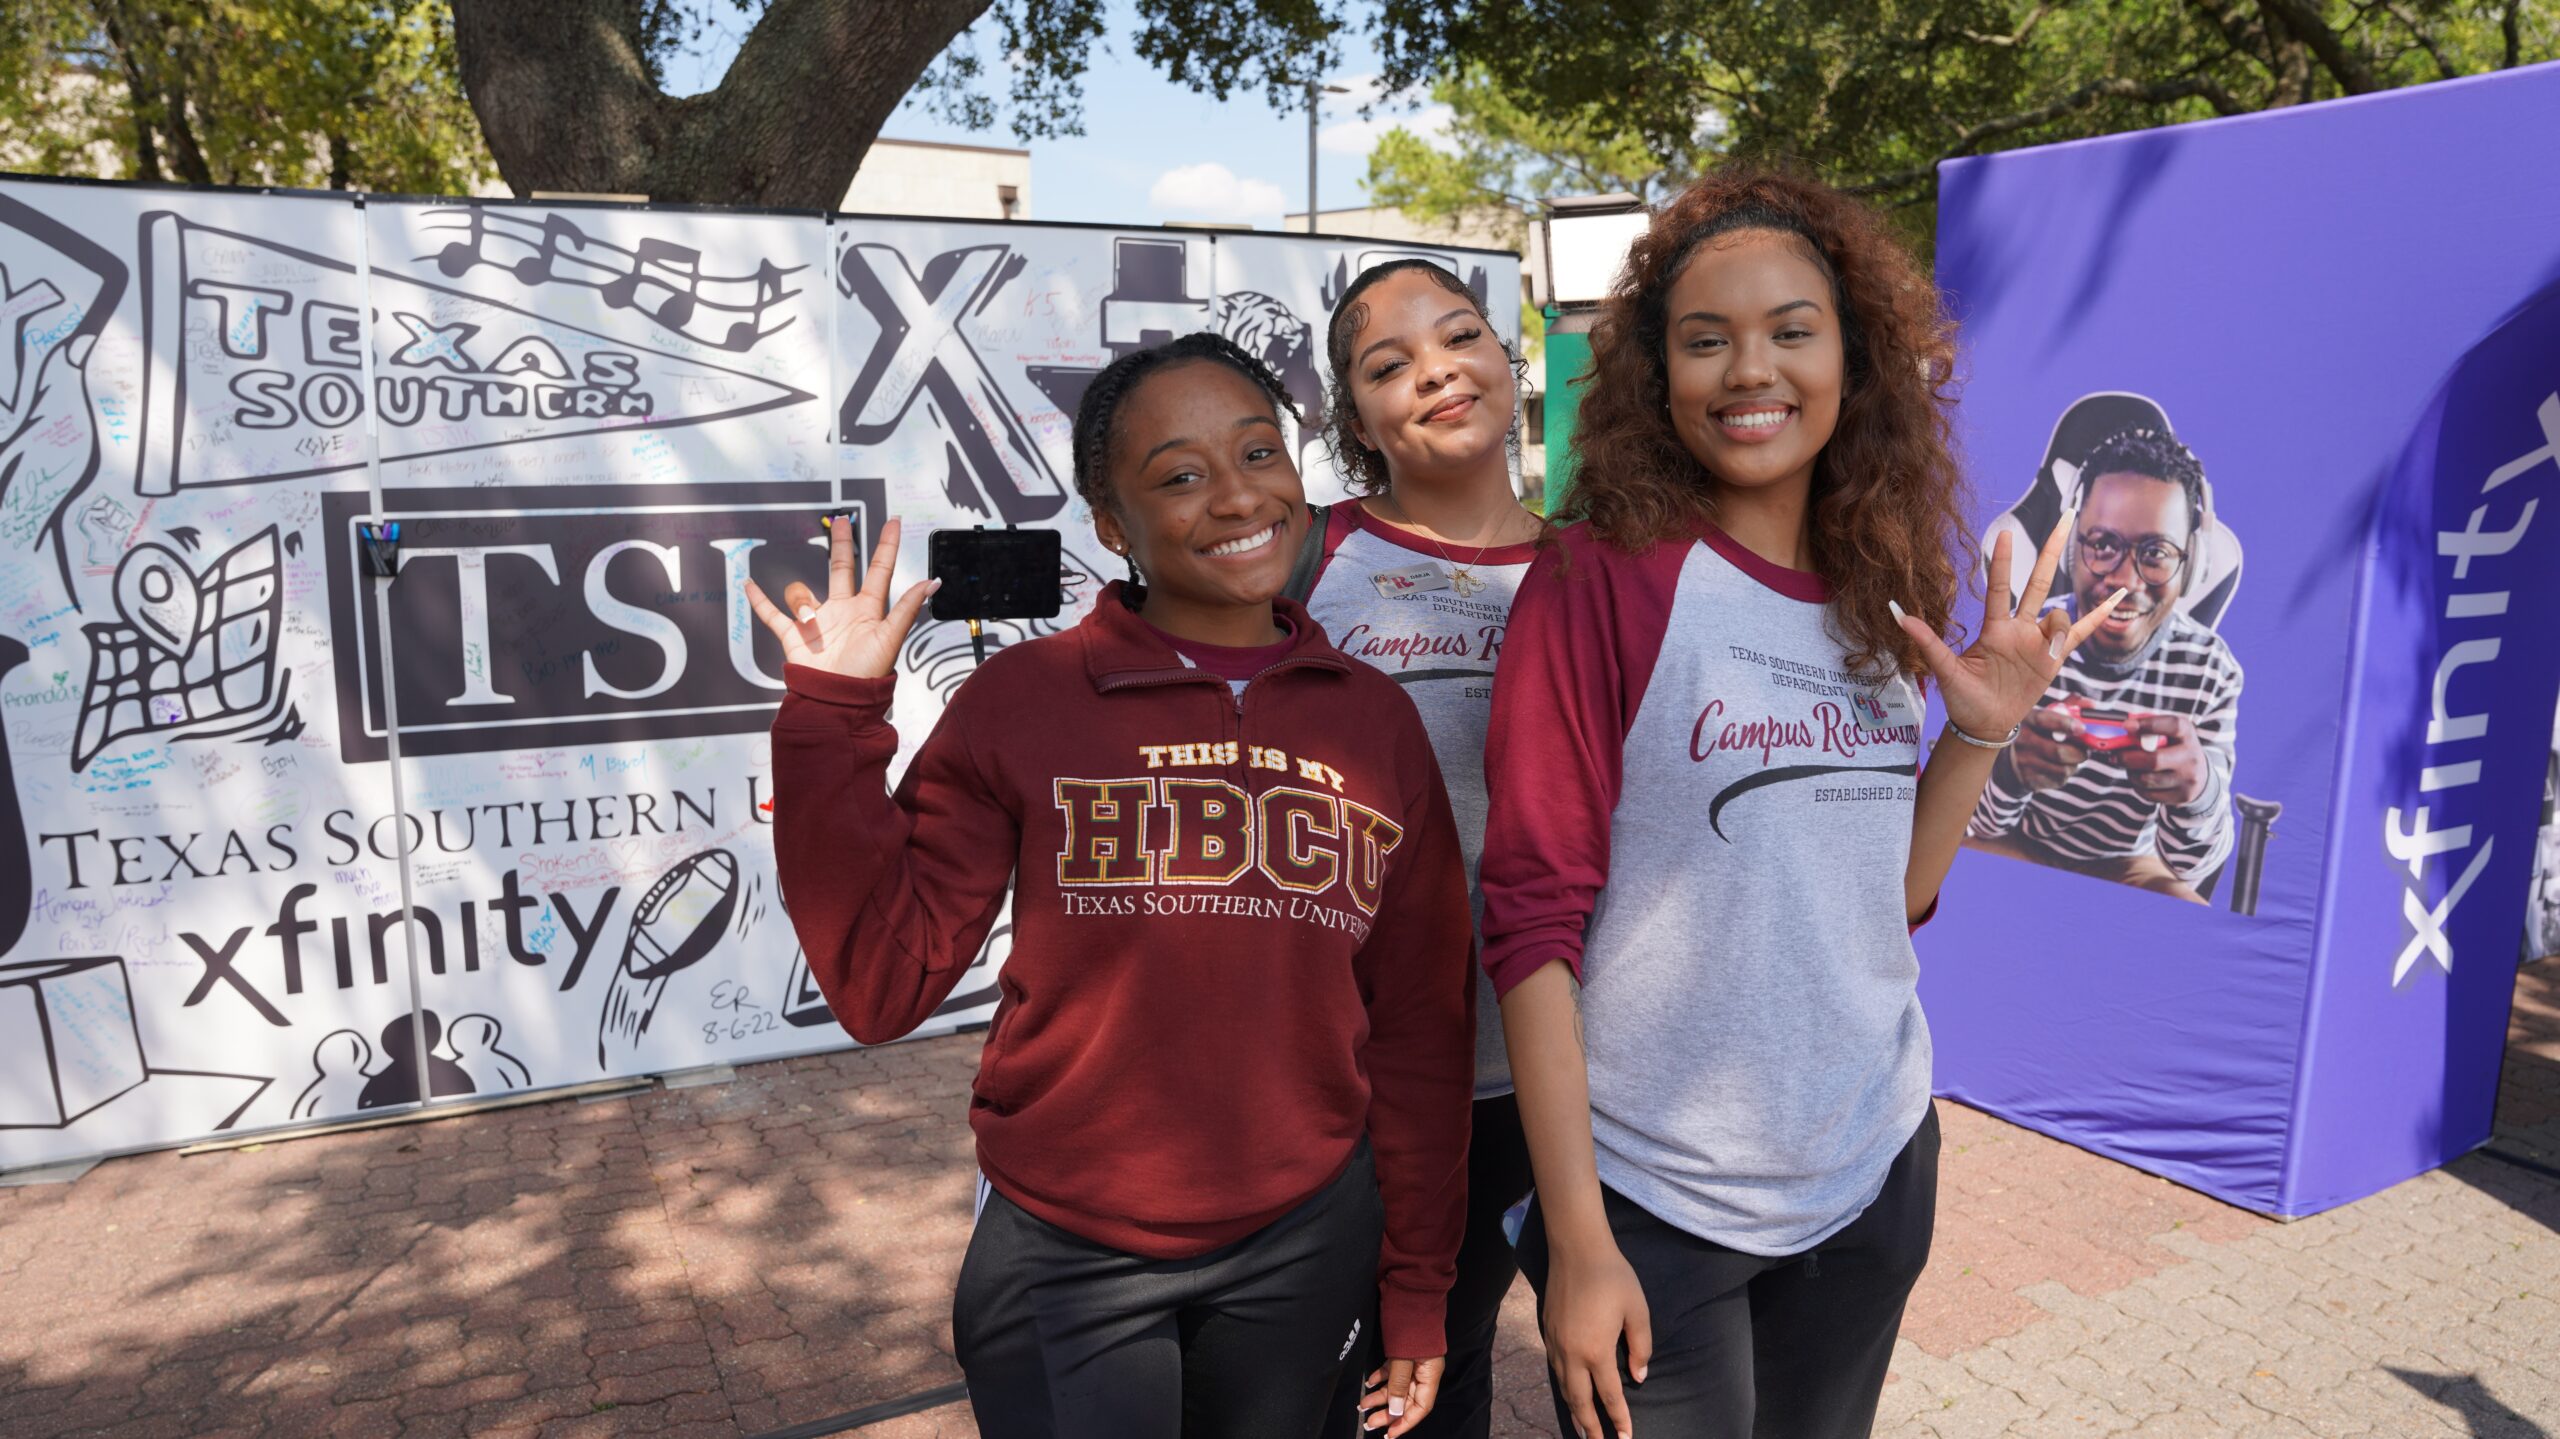 Three young women pose in front of TSU and Xfinity signs.